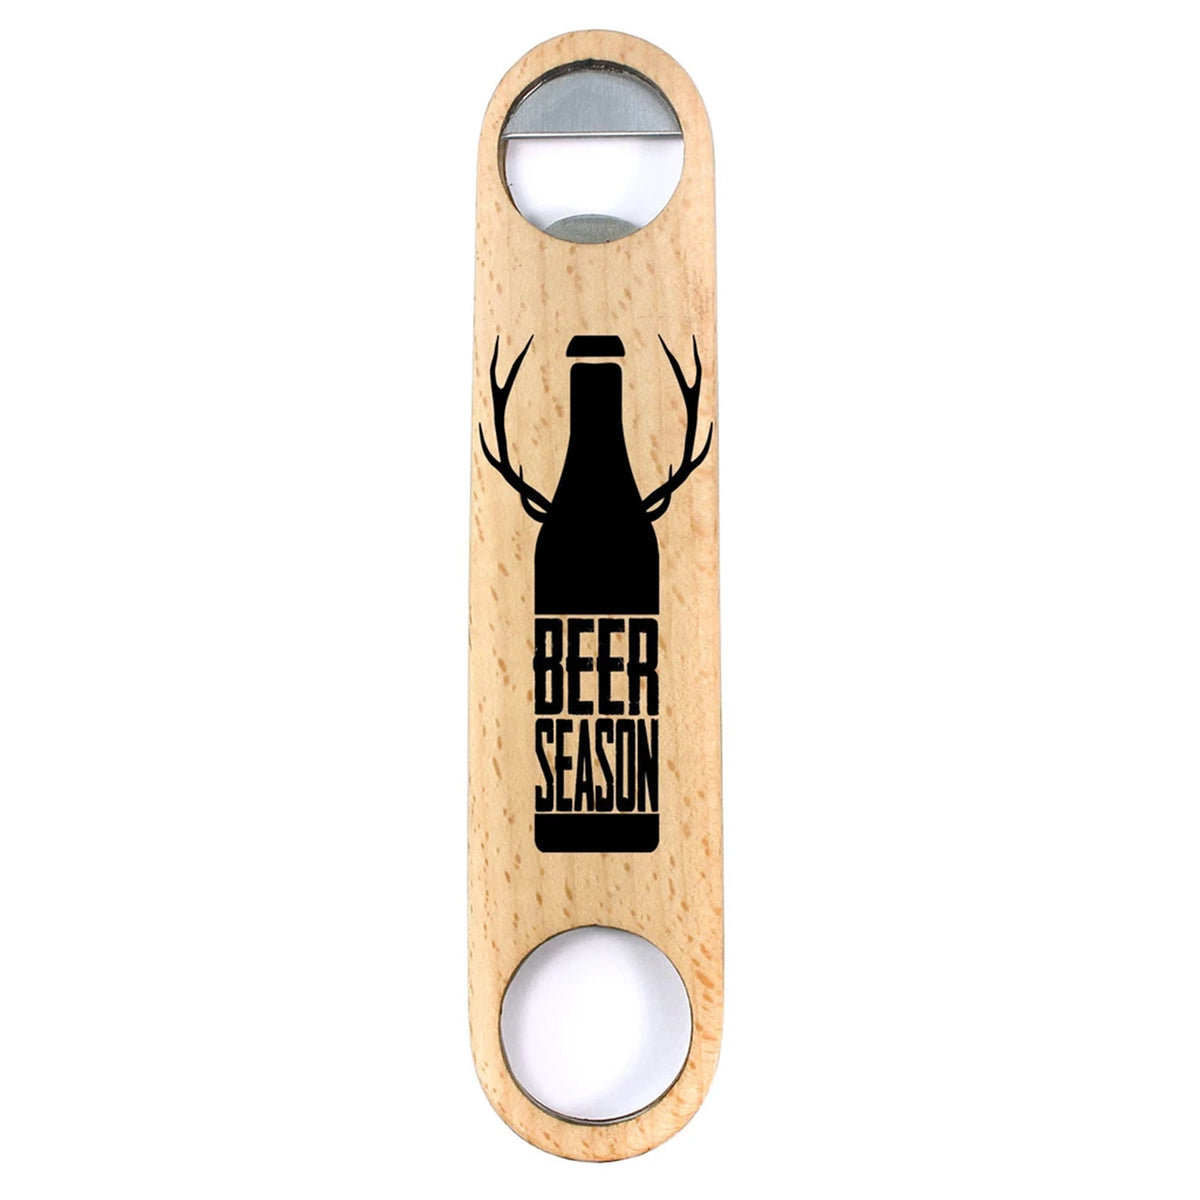 Torched Bottle Openers